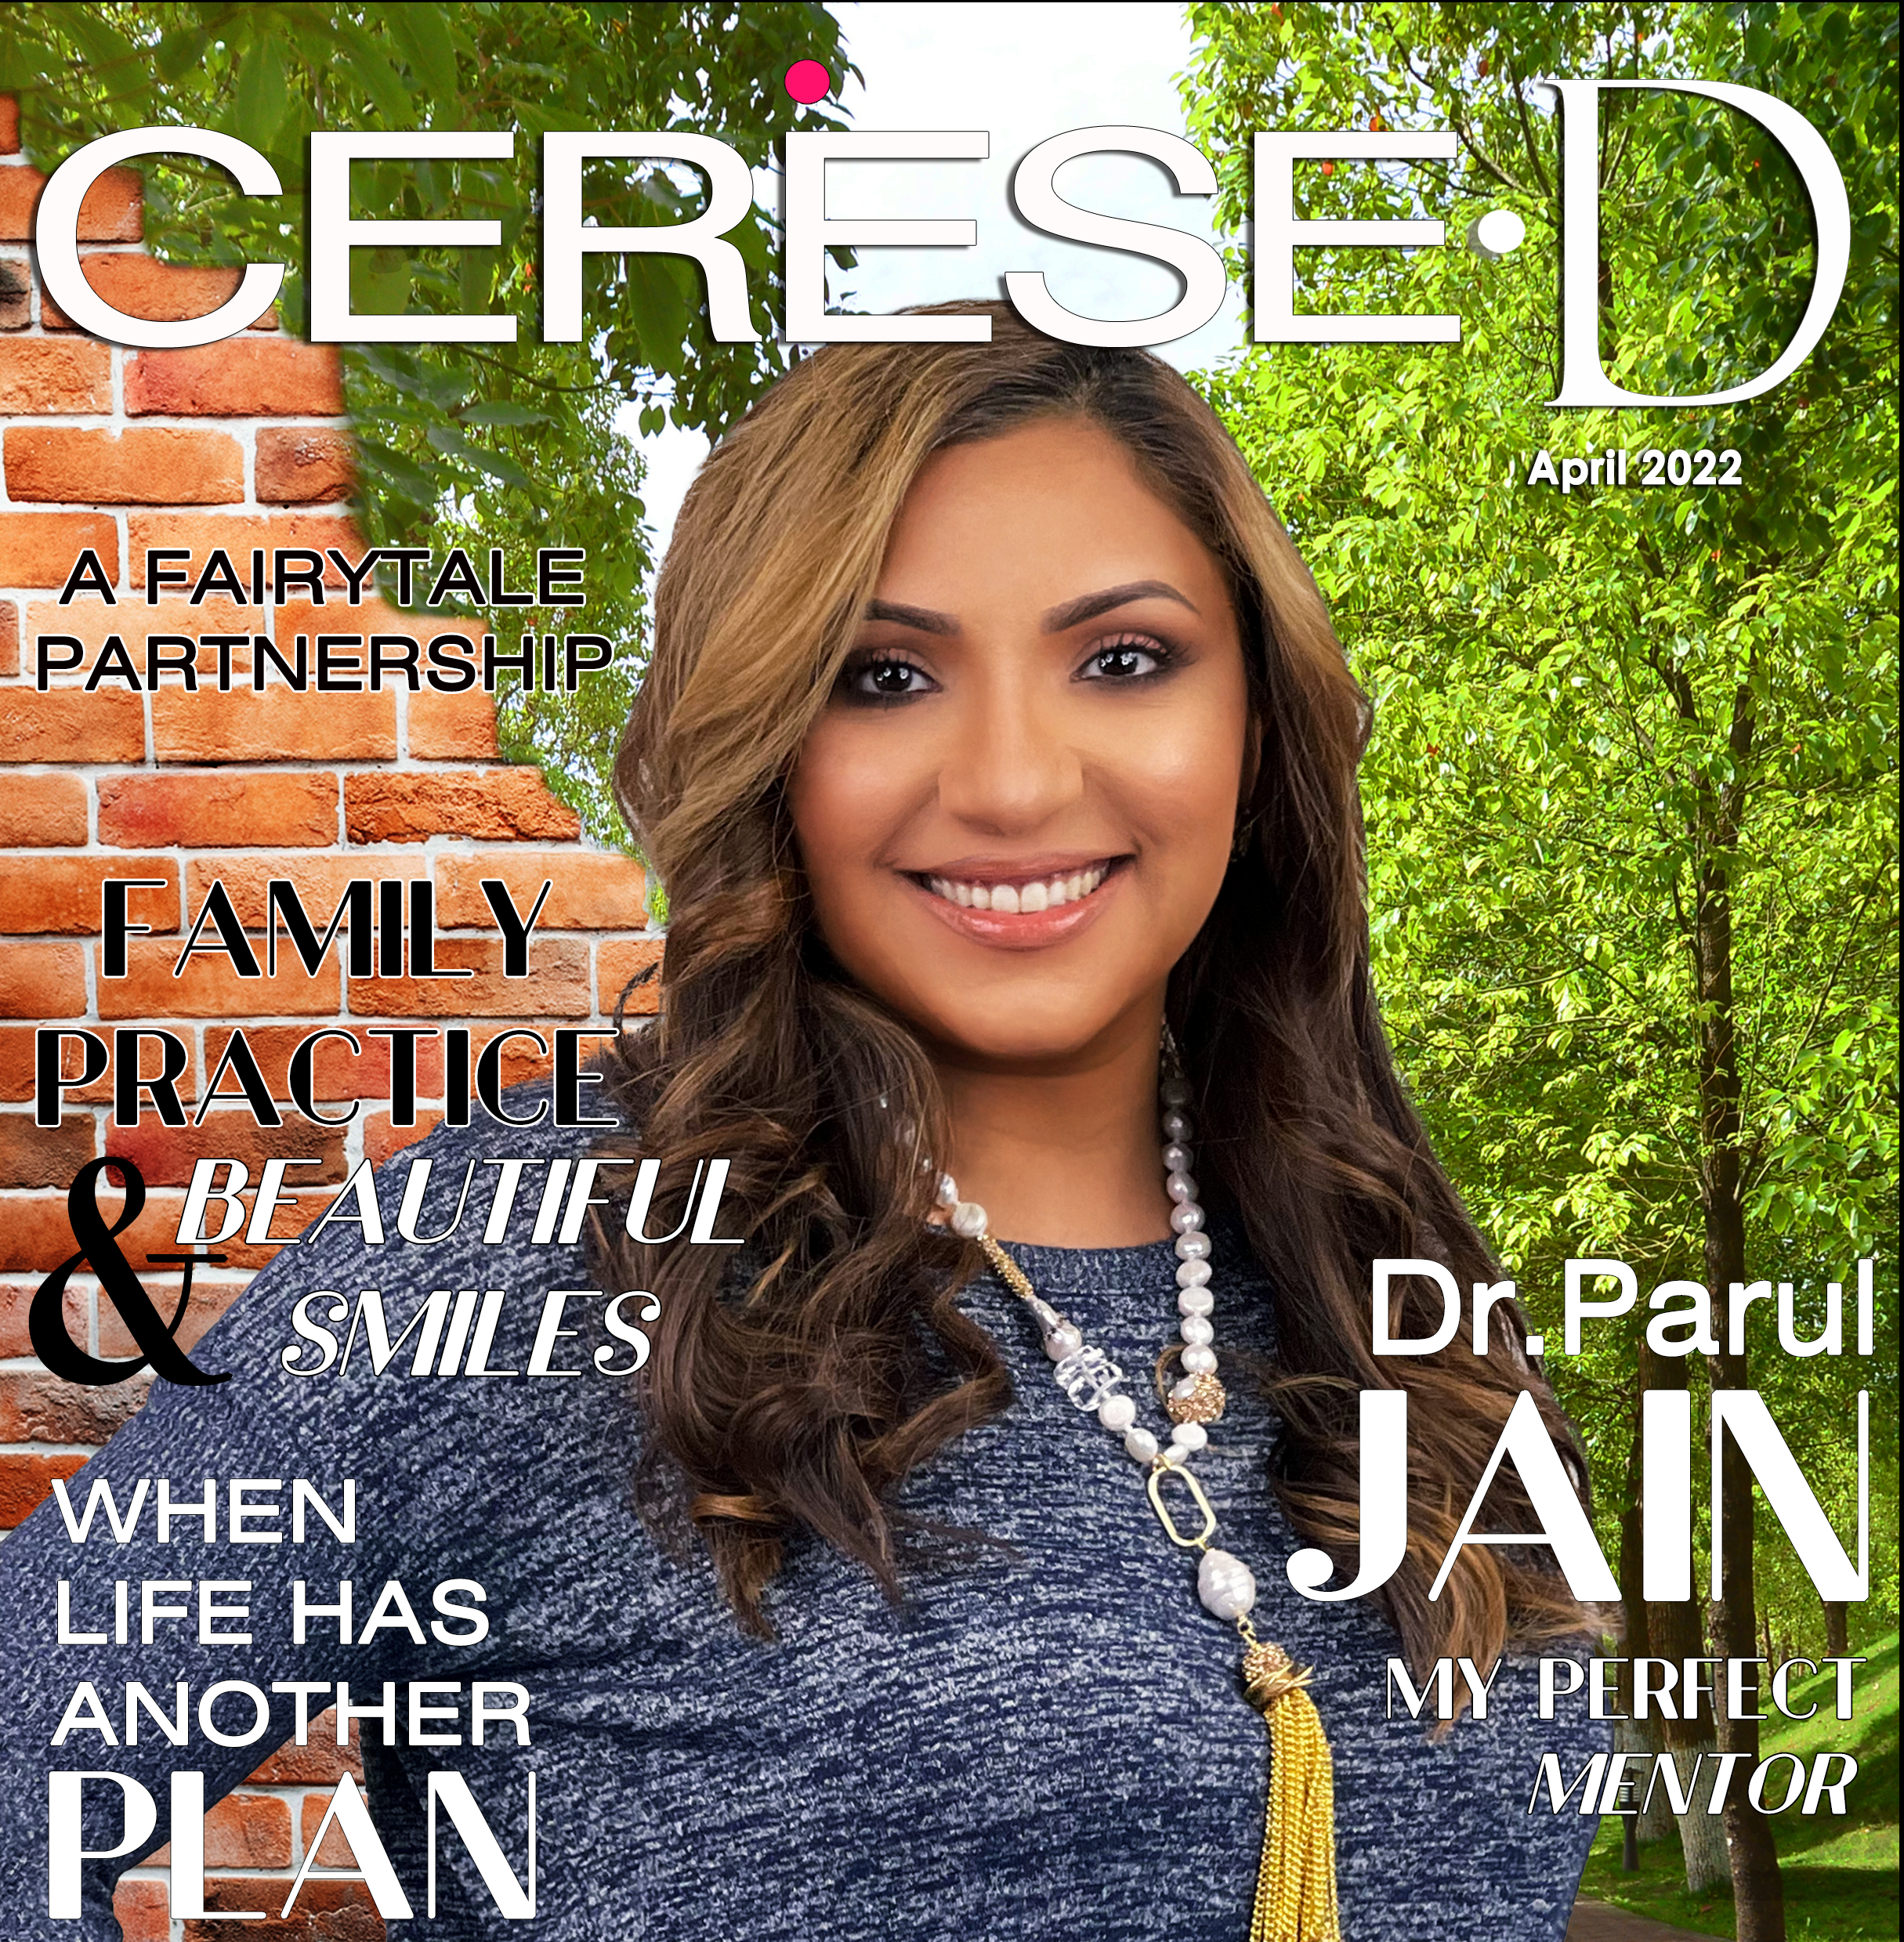 Dr Parul Jain in a blue top wearing a long tasseled necklace with trees and a brickwall in background